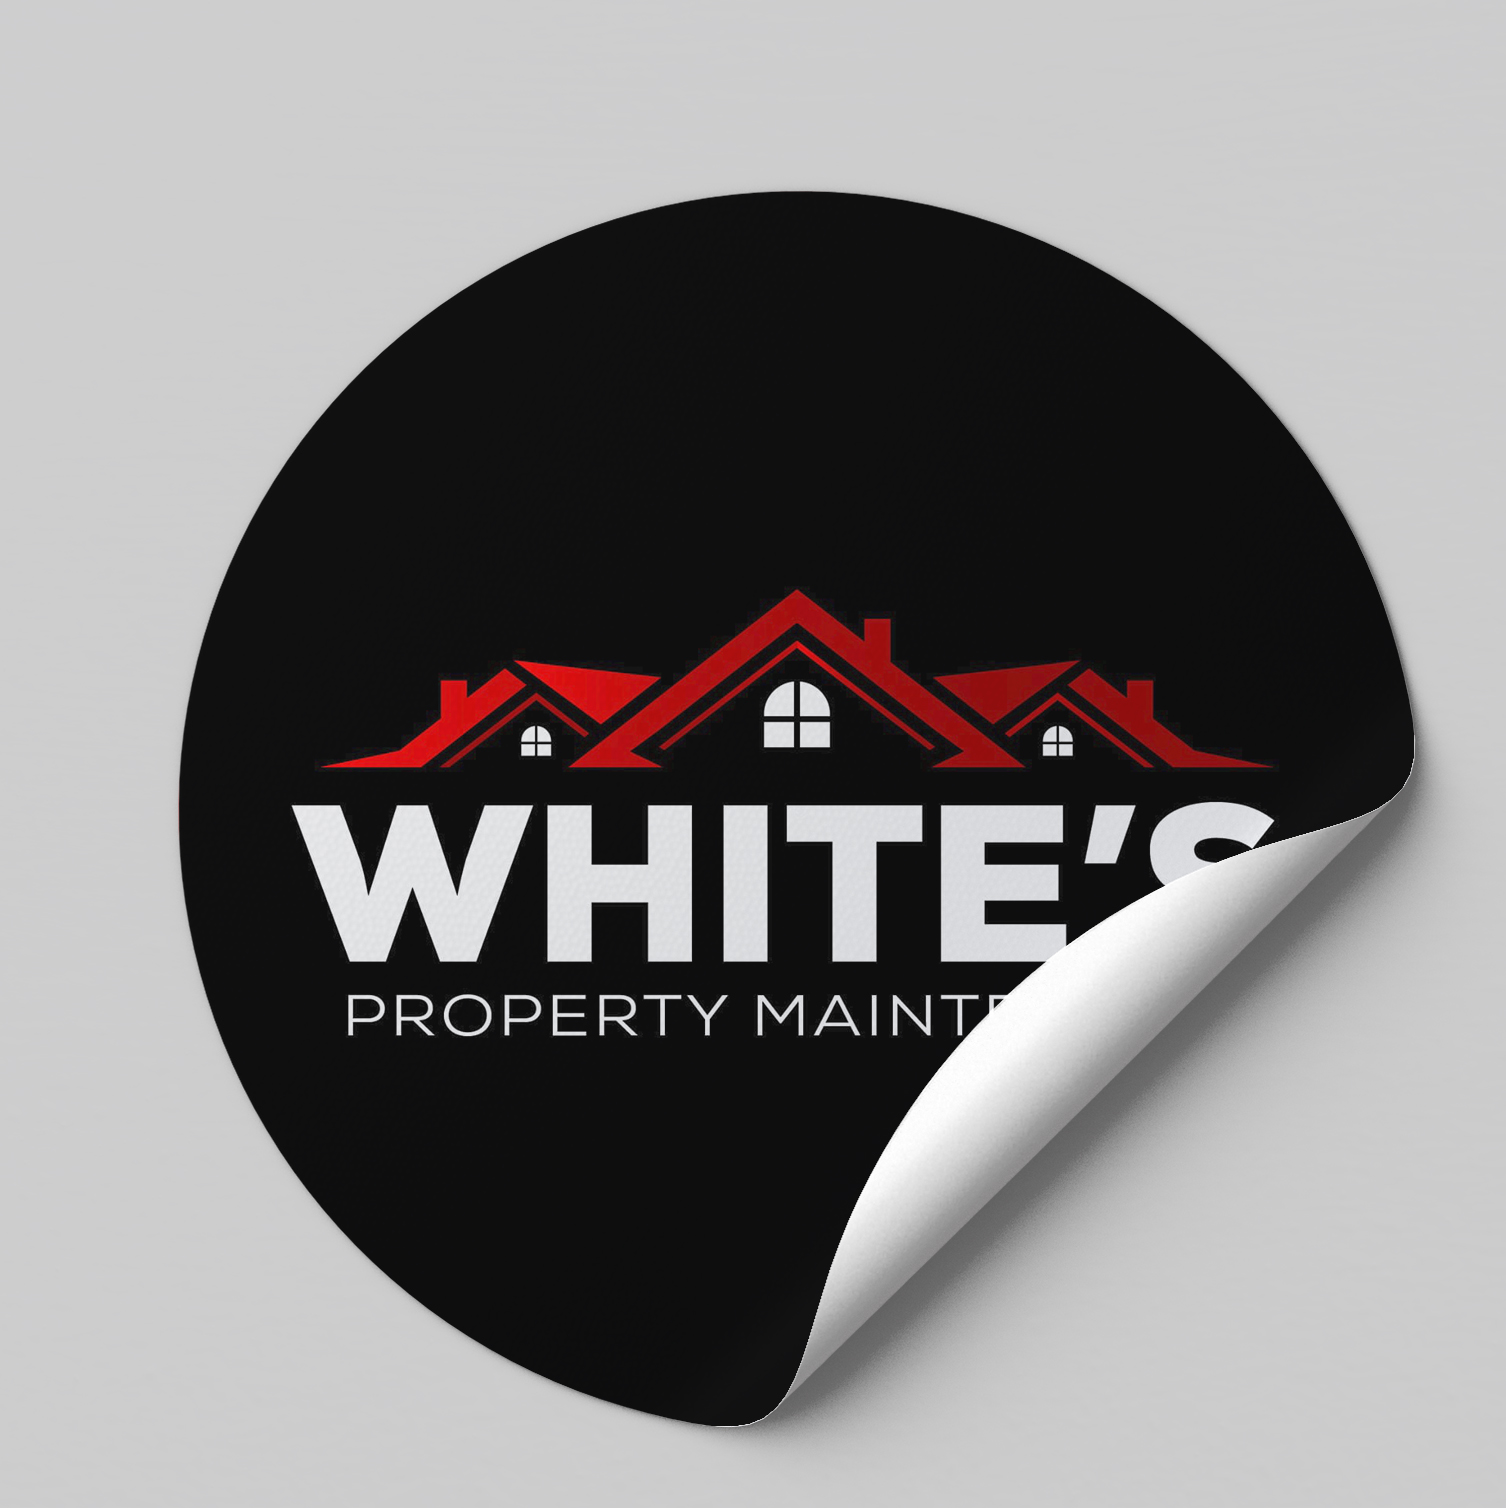 Labels for Whites property maintenance in seaton